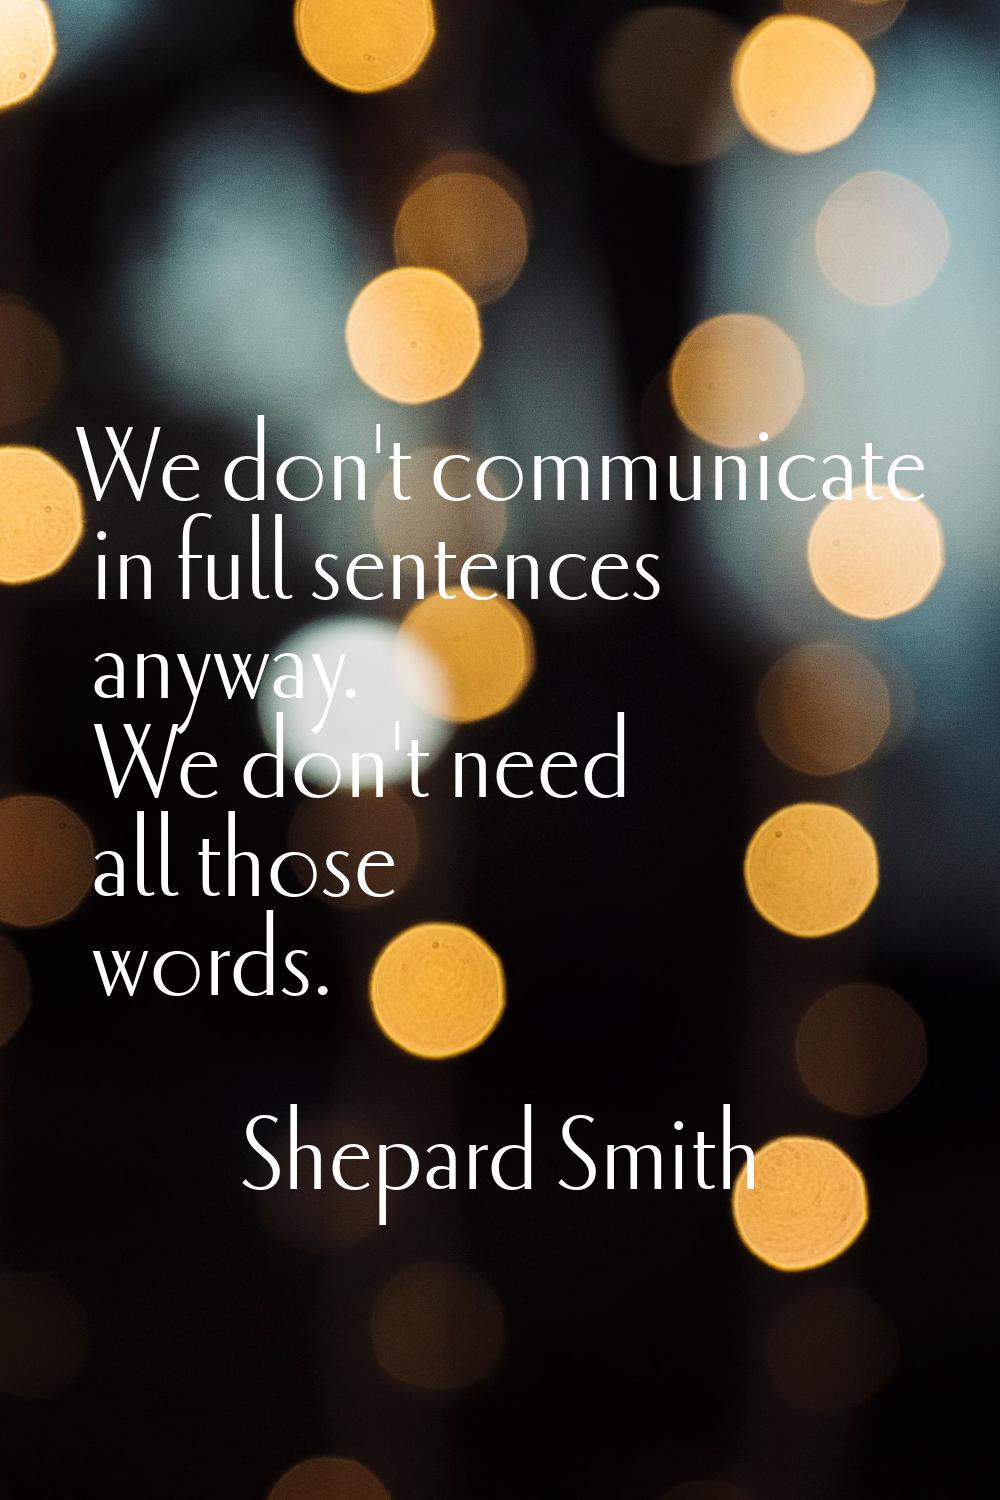 We don't communicate in full sentences anyway. We don't need all those words.